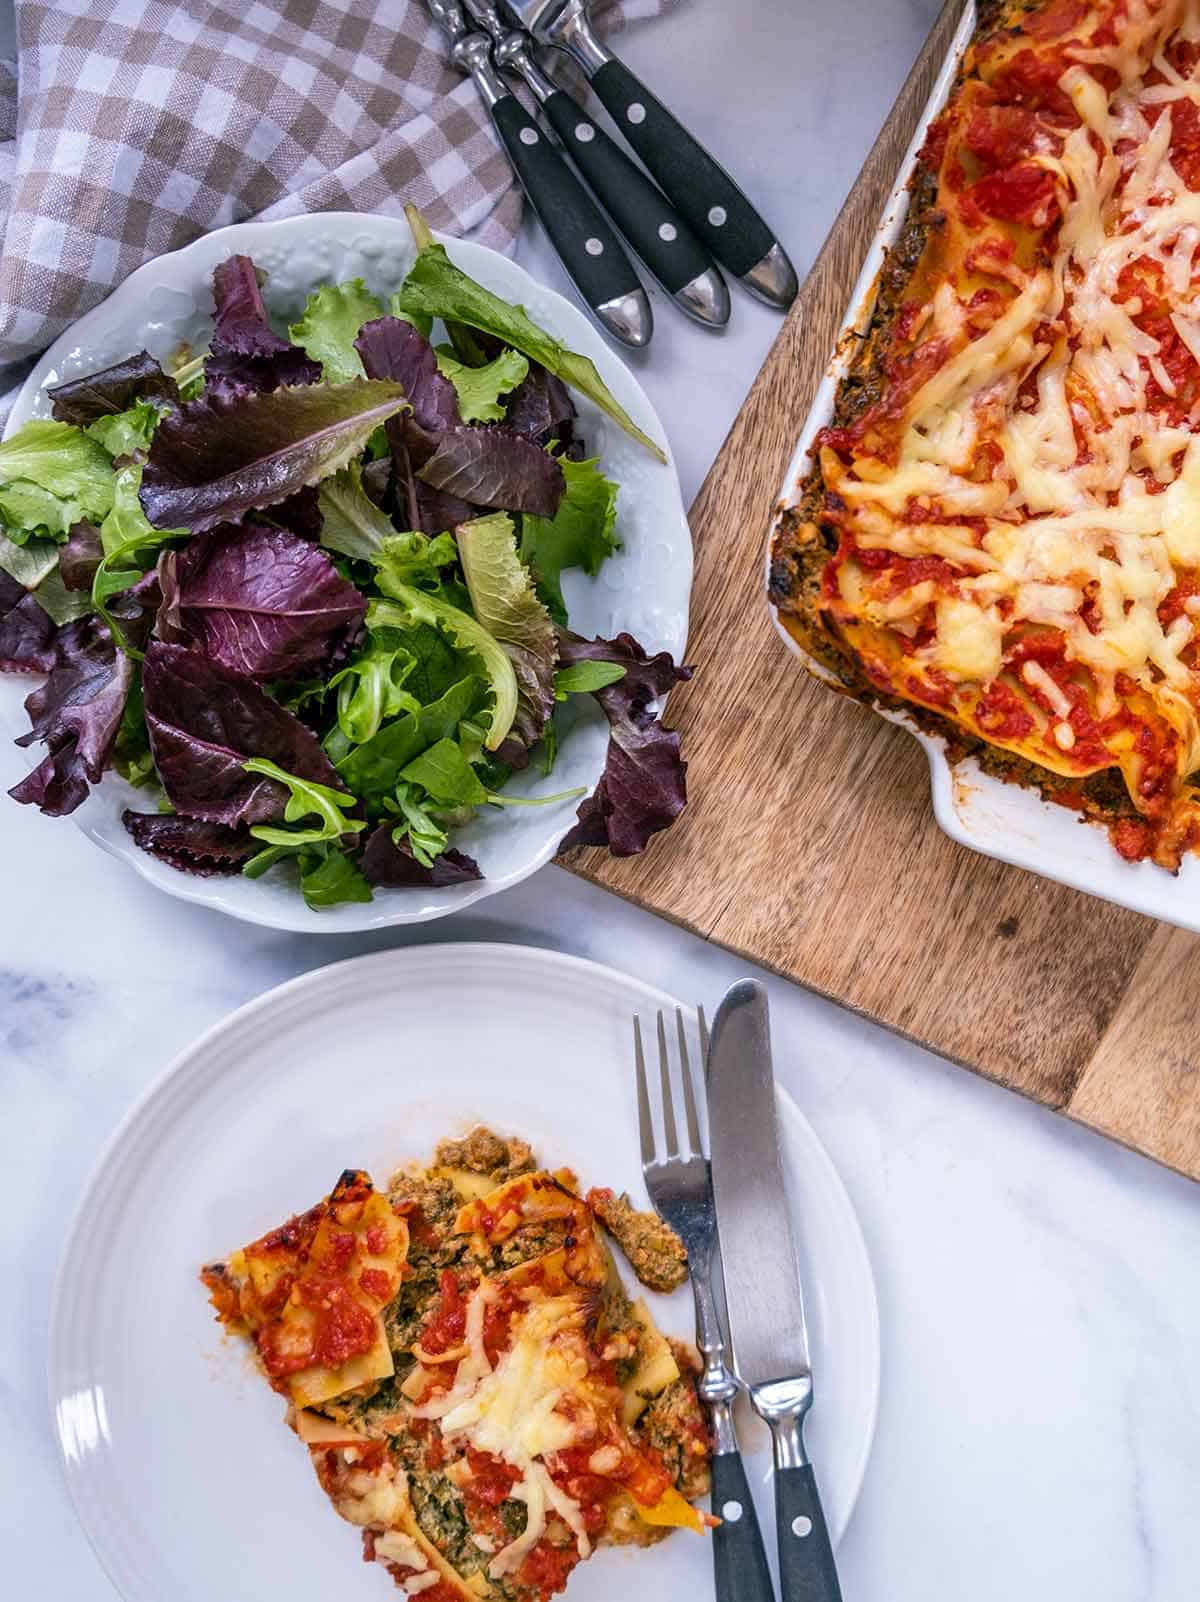 A white table with a bowl of salad and a dish of lasagna